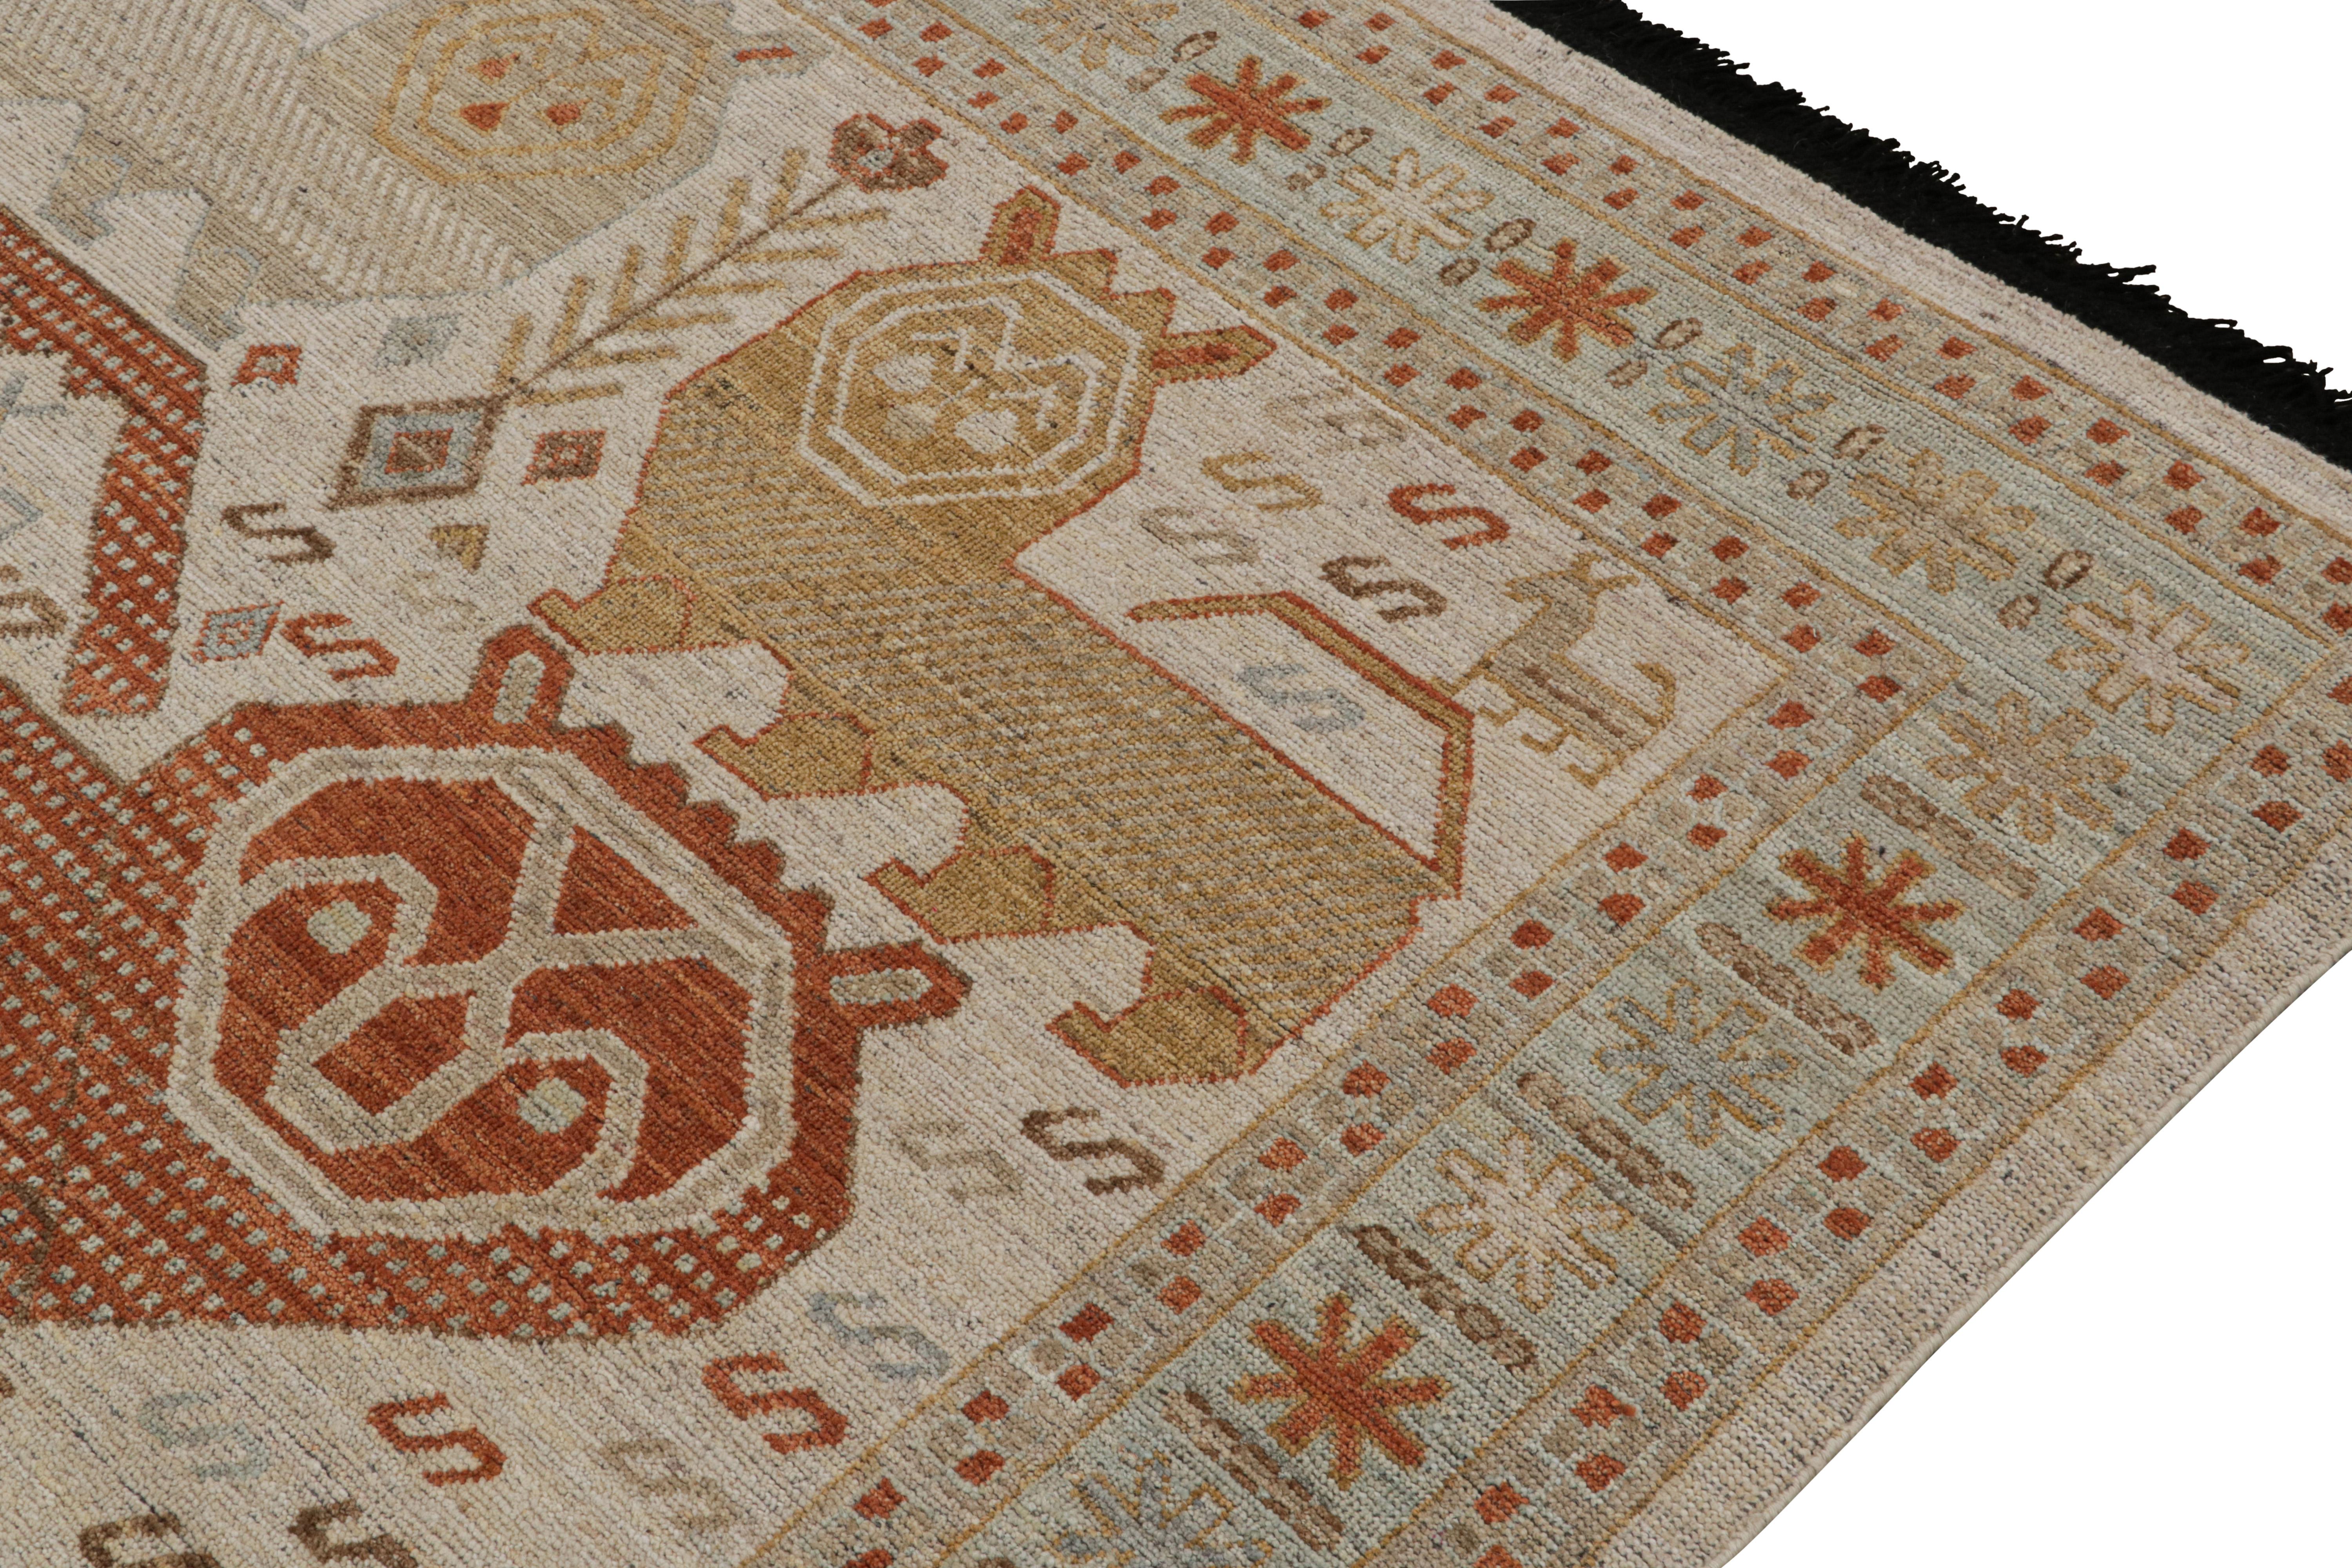 Indian Rug & Kilim’s Tribal Style Rug In Polychromatic Lion Pictorials For Sale